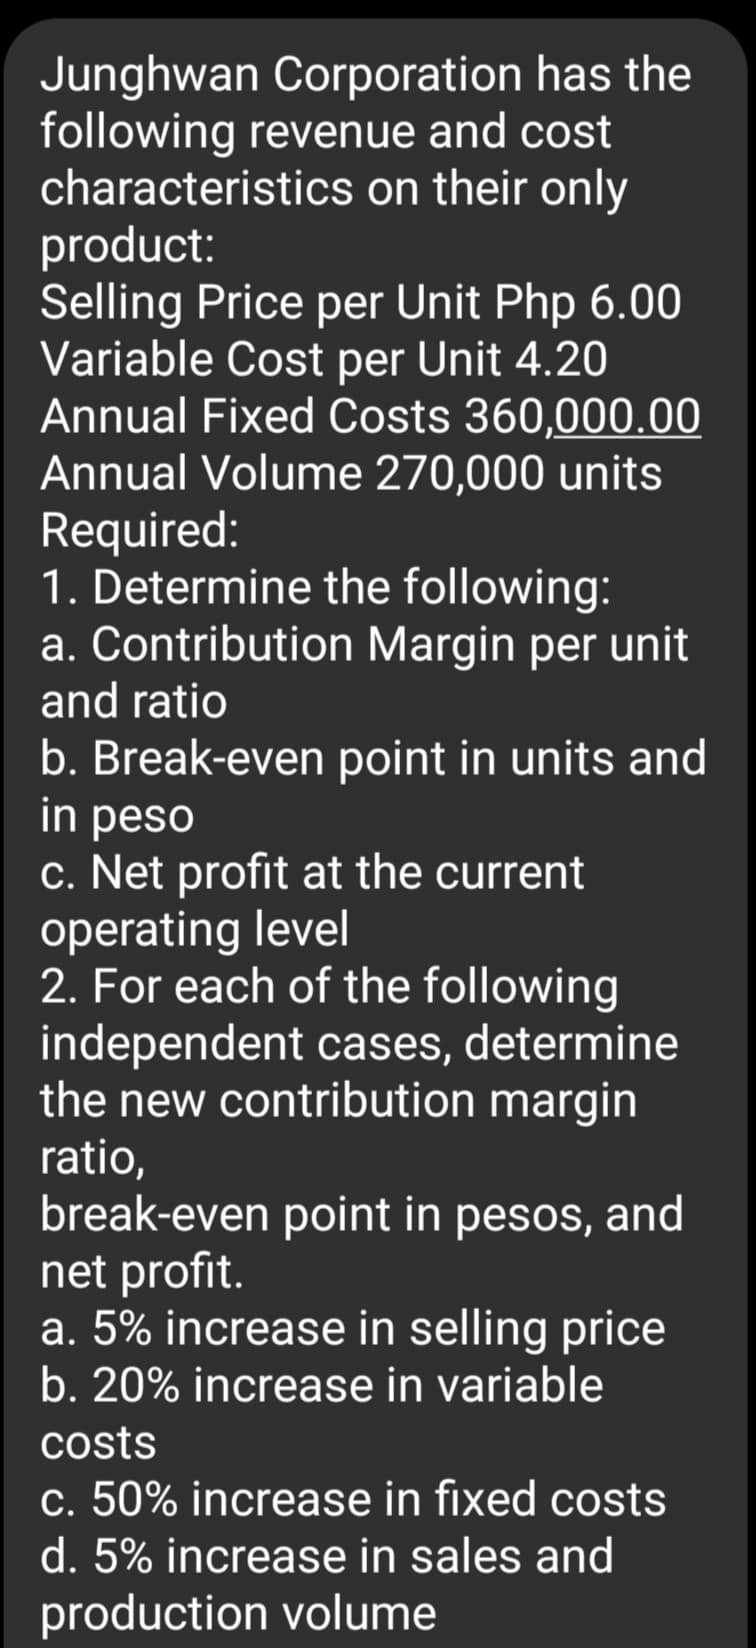 Junghwan Corporation has the
following revenue and cost
characteristics on their only
product:
Selling Price per Unit Php 6.00
Variable Cost per Unit 4.20
Annual Fixed Costs 360,000.00
Annual Volume 270,000 units
Required:
1. Determine the following:
a. Contribution Margin per unit
and ratio
b. Break-even point in units and
in peso
c. Net profit at the current
operating level
2. For each of the following
independent cases, determine
the new contribution margin
ratio,
break-even point in pesos, and
net profit.
a. 5% increase in selling price
b. 20% increase in variable
costs
c. 50% increase in fixed costs
d. 5% increase in sales and
production volume
